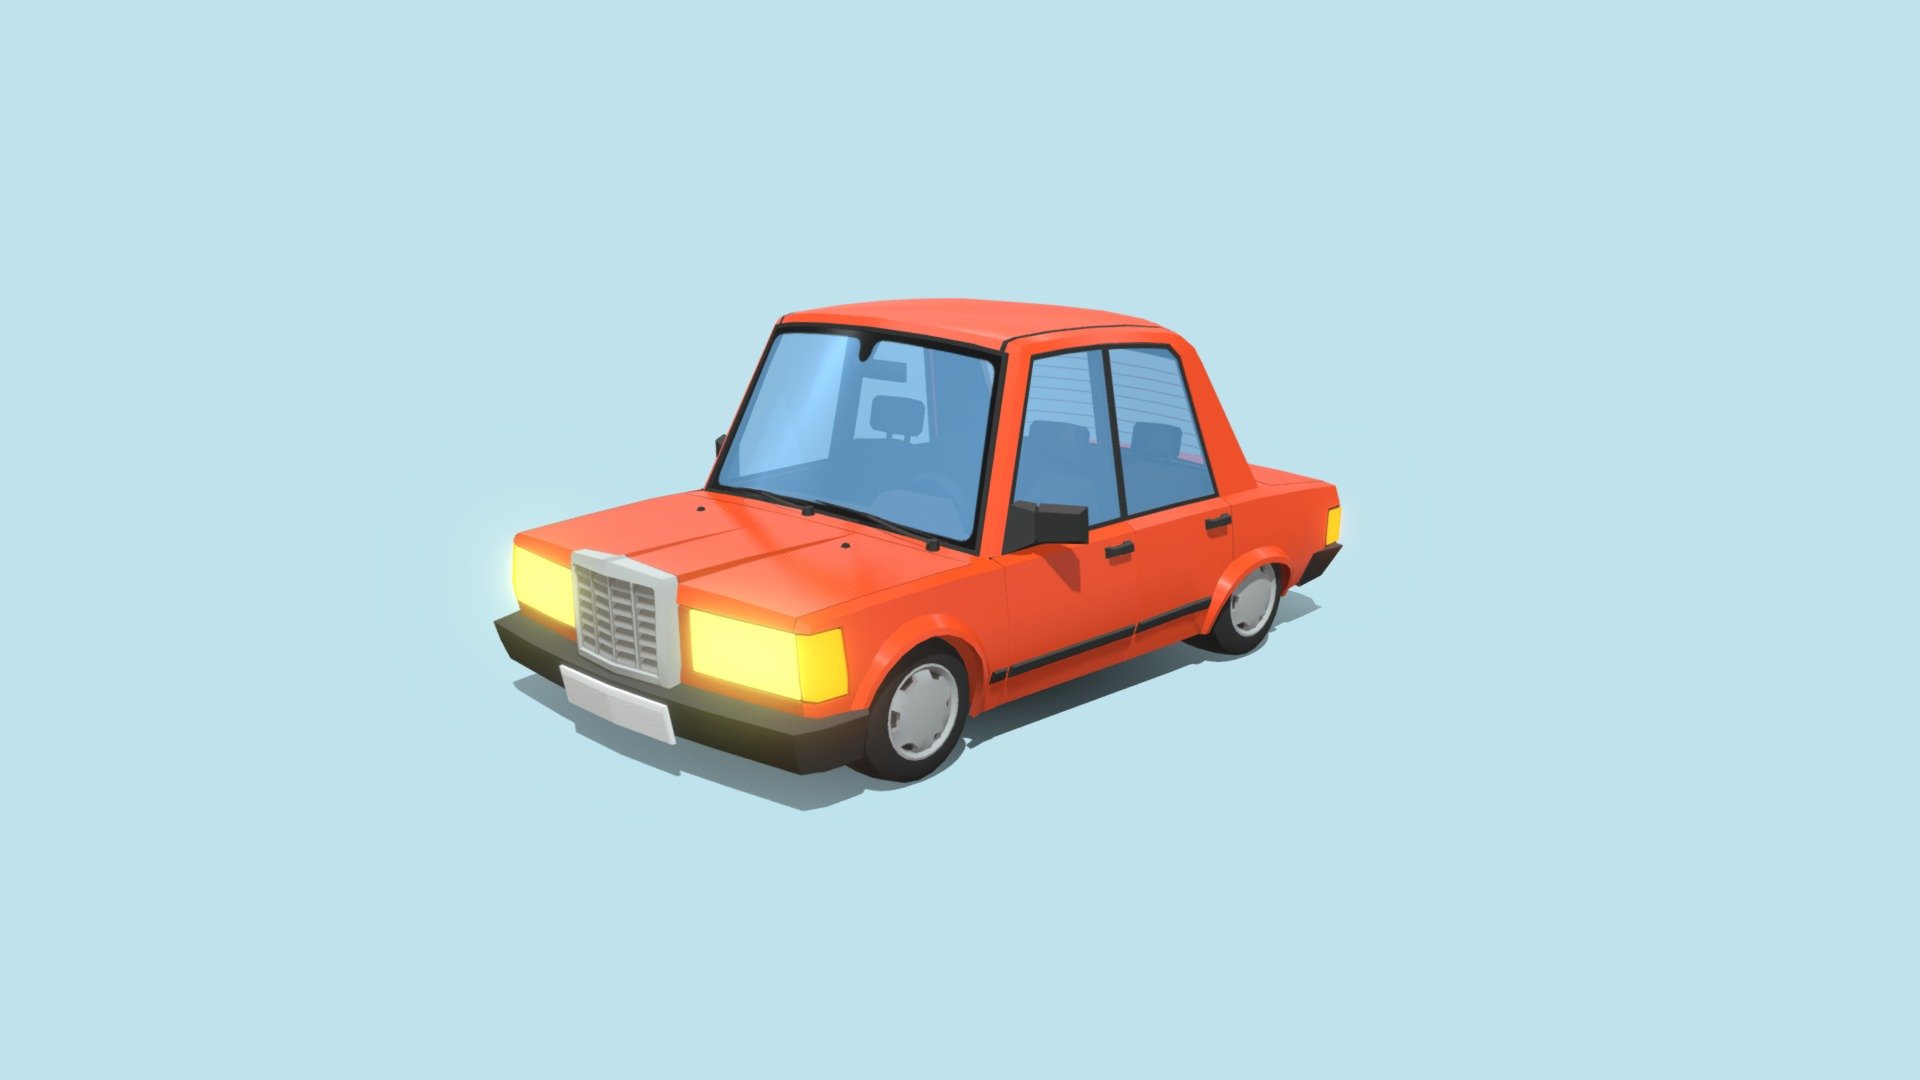 Car for your game or animation. You can disassemble it or blow it up in peaces. Have fun with it!
This model is part of still growing collection:
https://skfb.ly/ozpn9 - Low-poly cartoon style car 01 - Buy Royalty Free 3D model by arturs.vitas 3d model